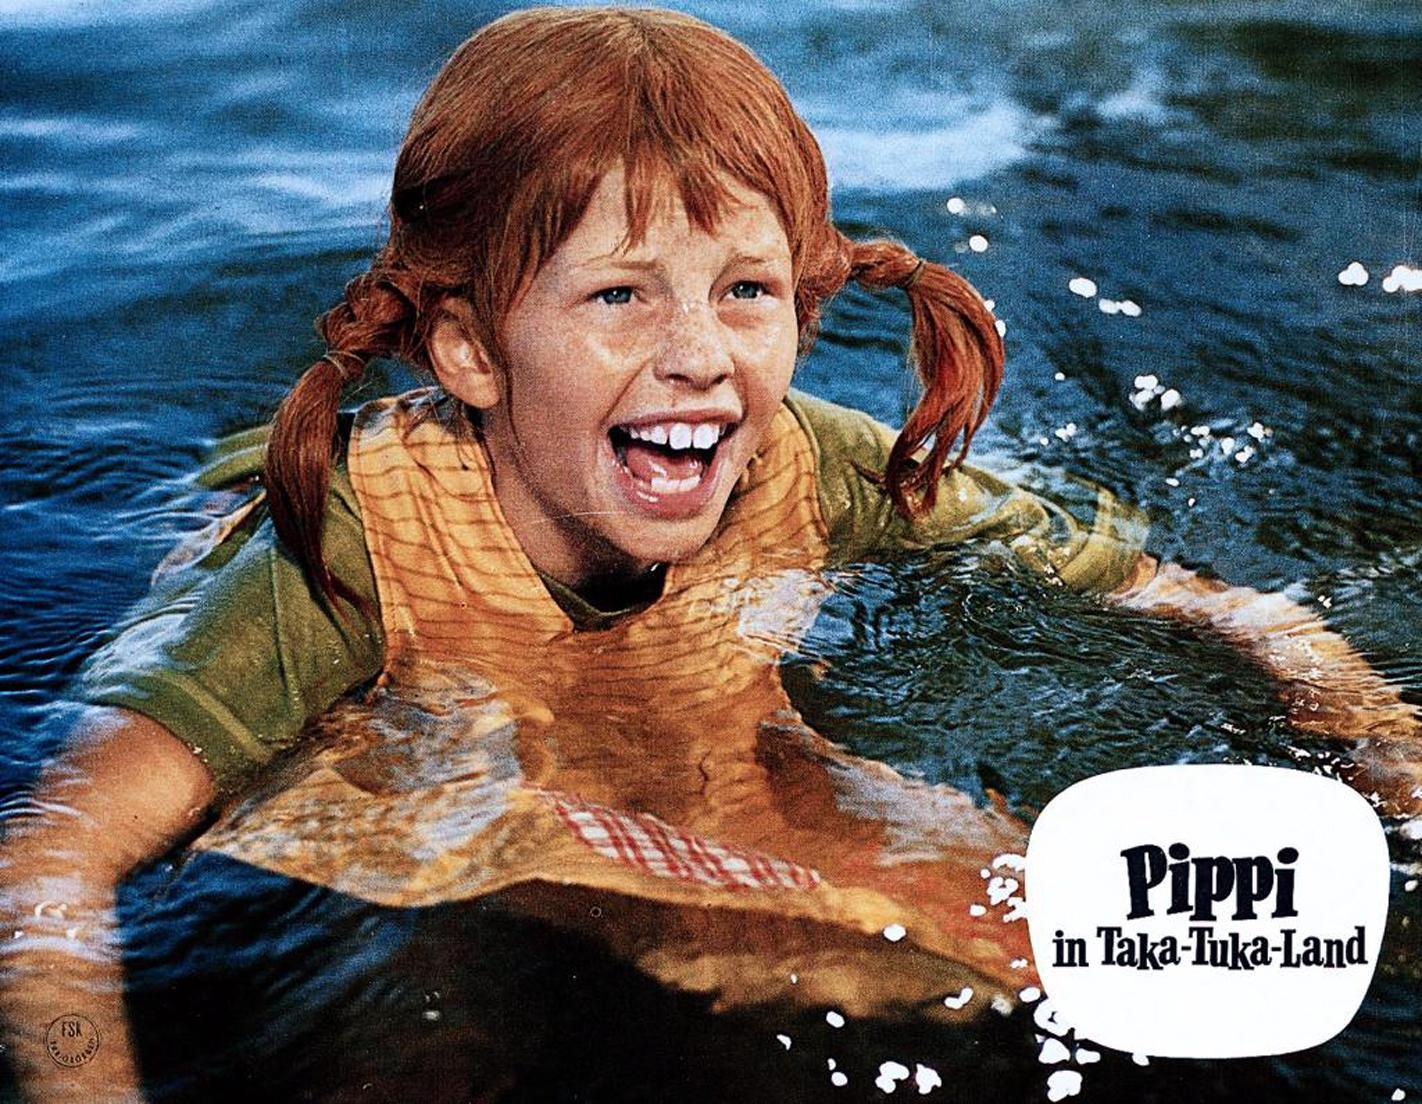 Pippi Longstocking Pippi Goes to the South Seas in the South